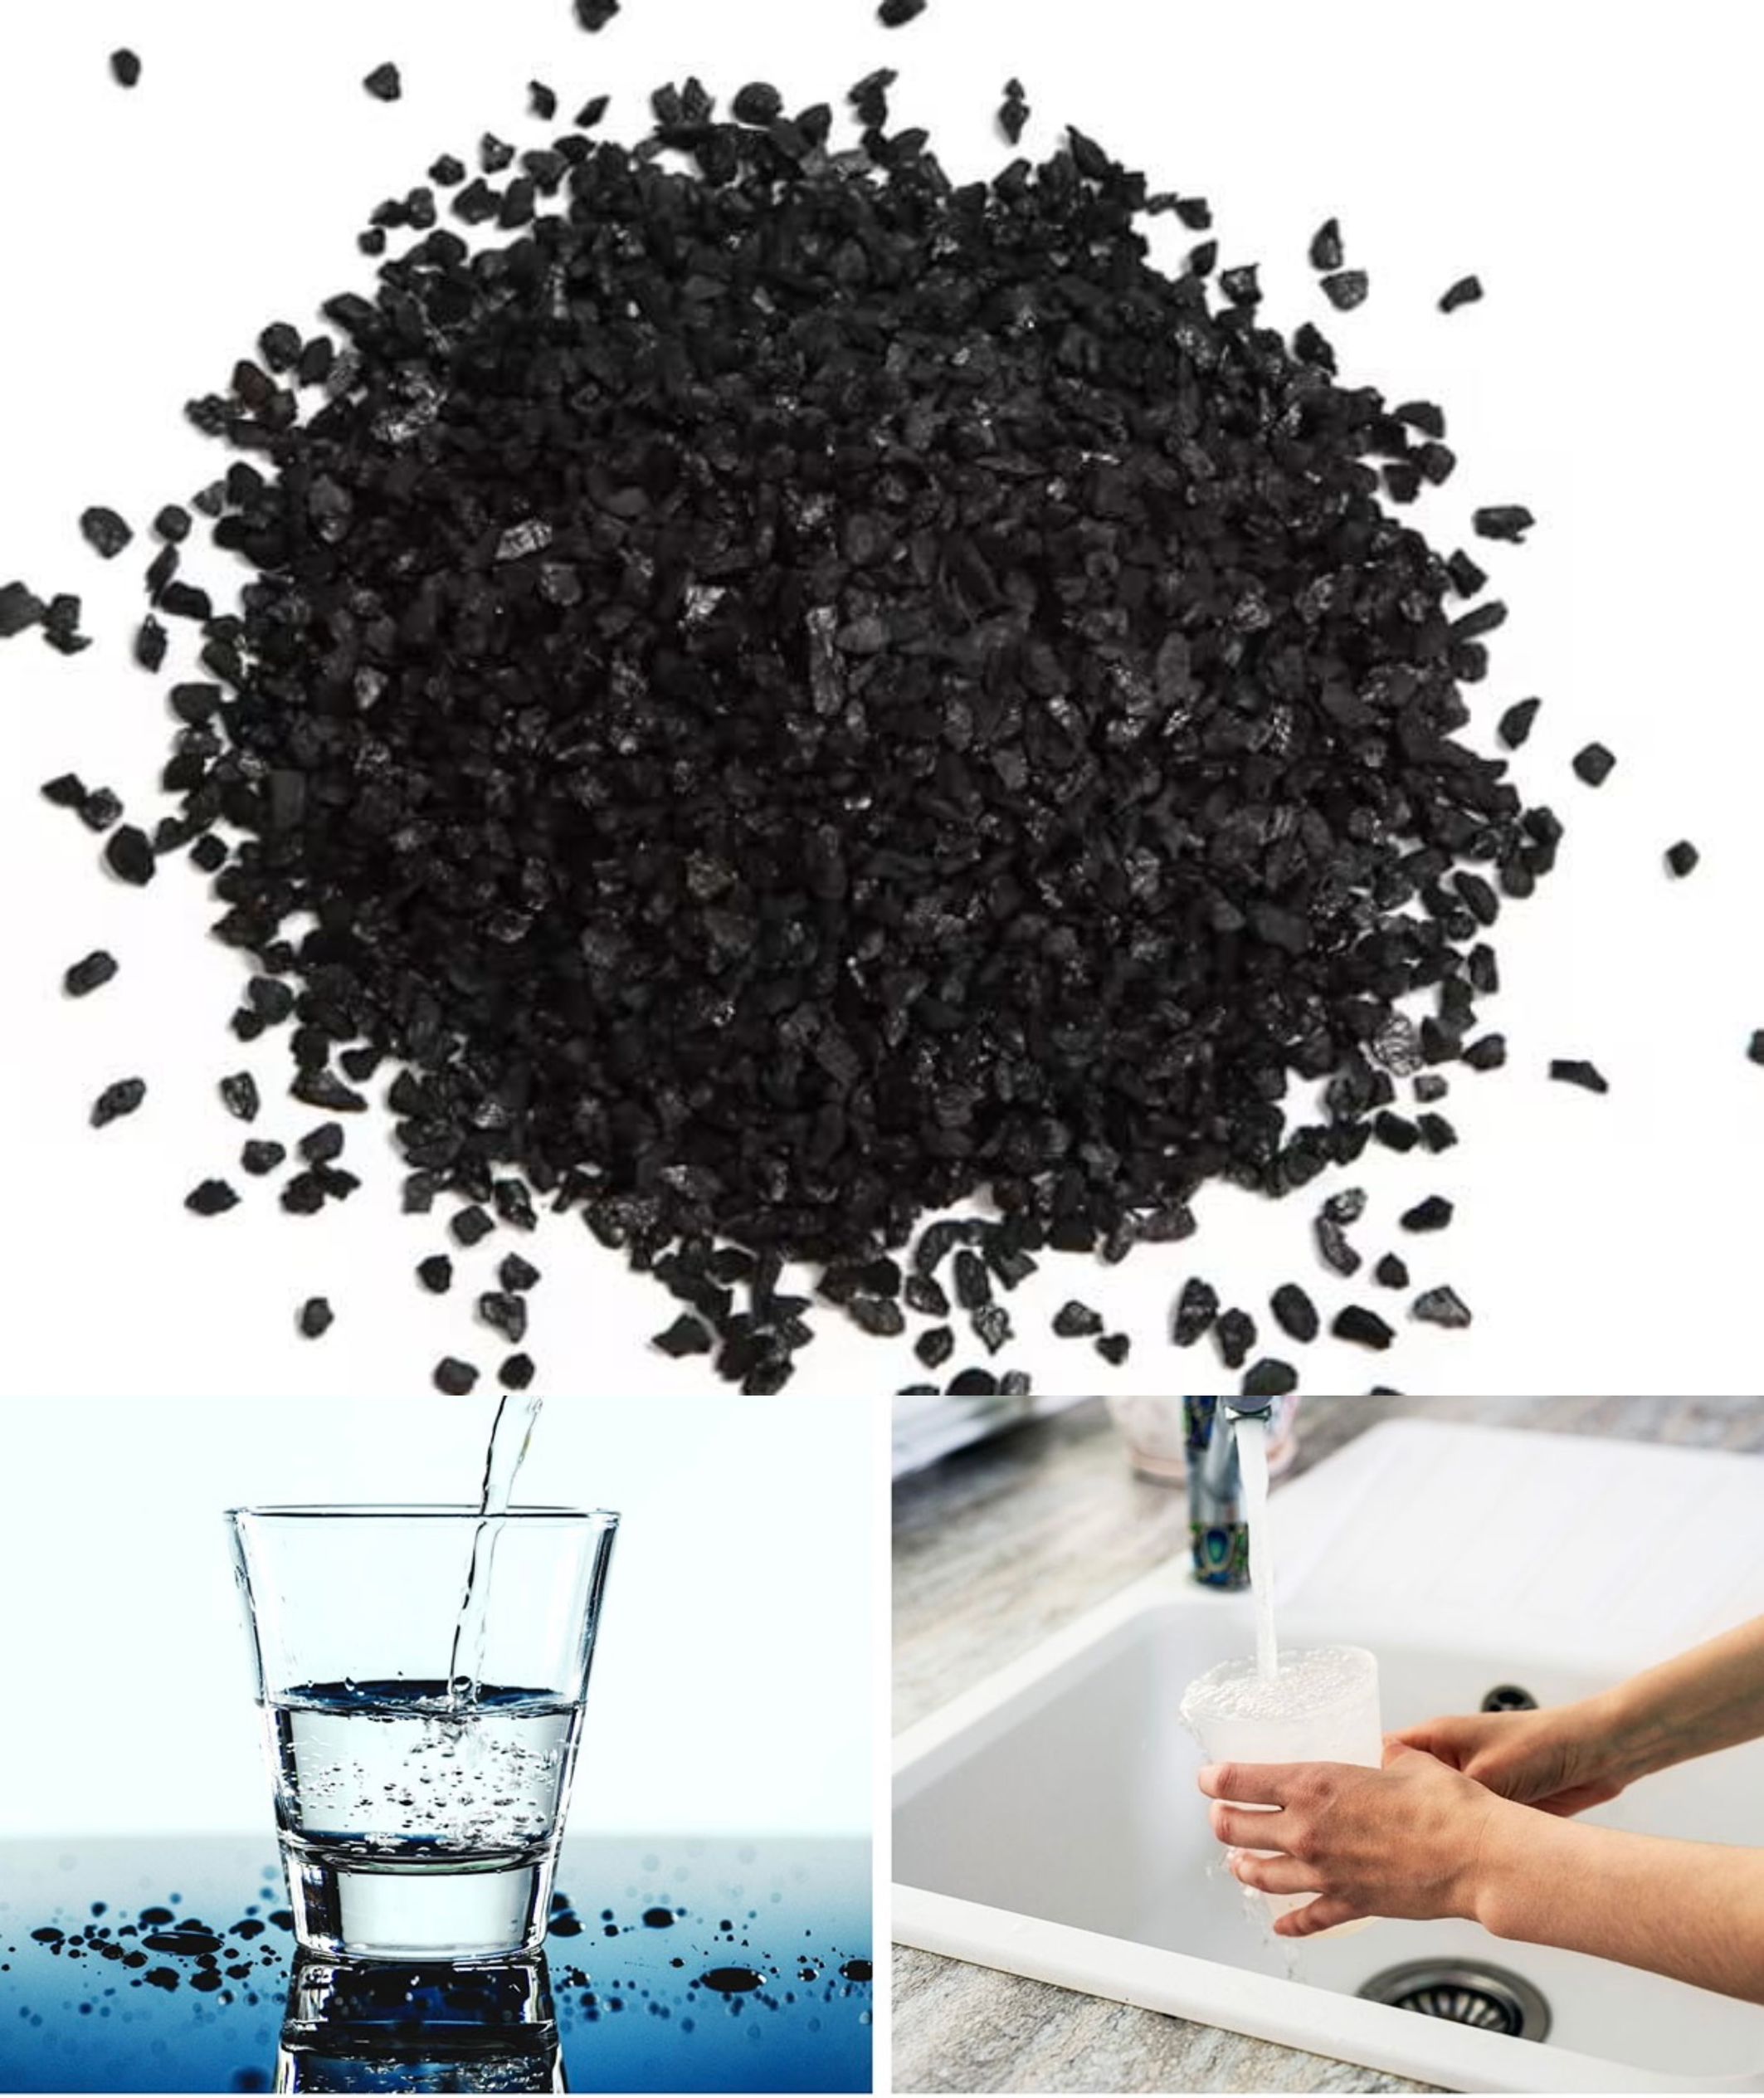 How Does Powdered Activated Carbon Highlight Its Advantages in Water Treatment?